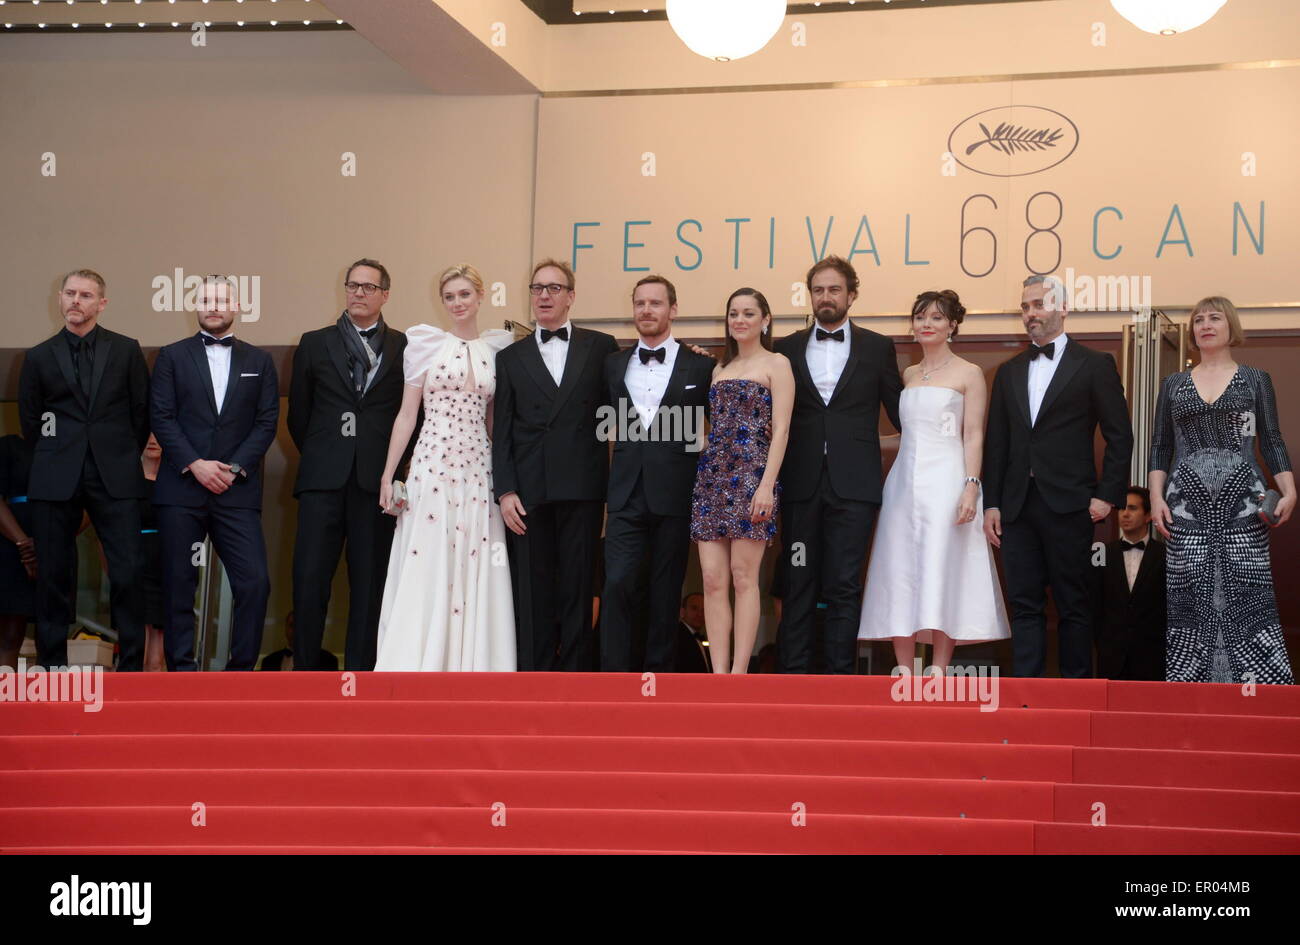 Cannes, France. 14th May, 2015. CANNES, FRANCE - MAY 23: Actors Elizabeth Debicki, David Thewlis, Michael Fassbender, Marion Cotillard, Director Justin Kurzel, Actress Essie Davis and Producer Iain Canning attend the 'Macbeth' Premiere during the 68th annual Cannes Film Festival on May 23, 2015 in Cannes, France. © Frederick Injimbert/ZUMA Wire/Alamy Live News Stock Photo